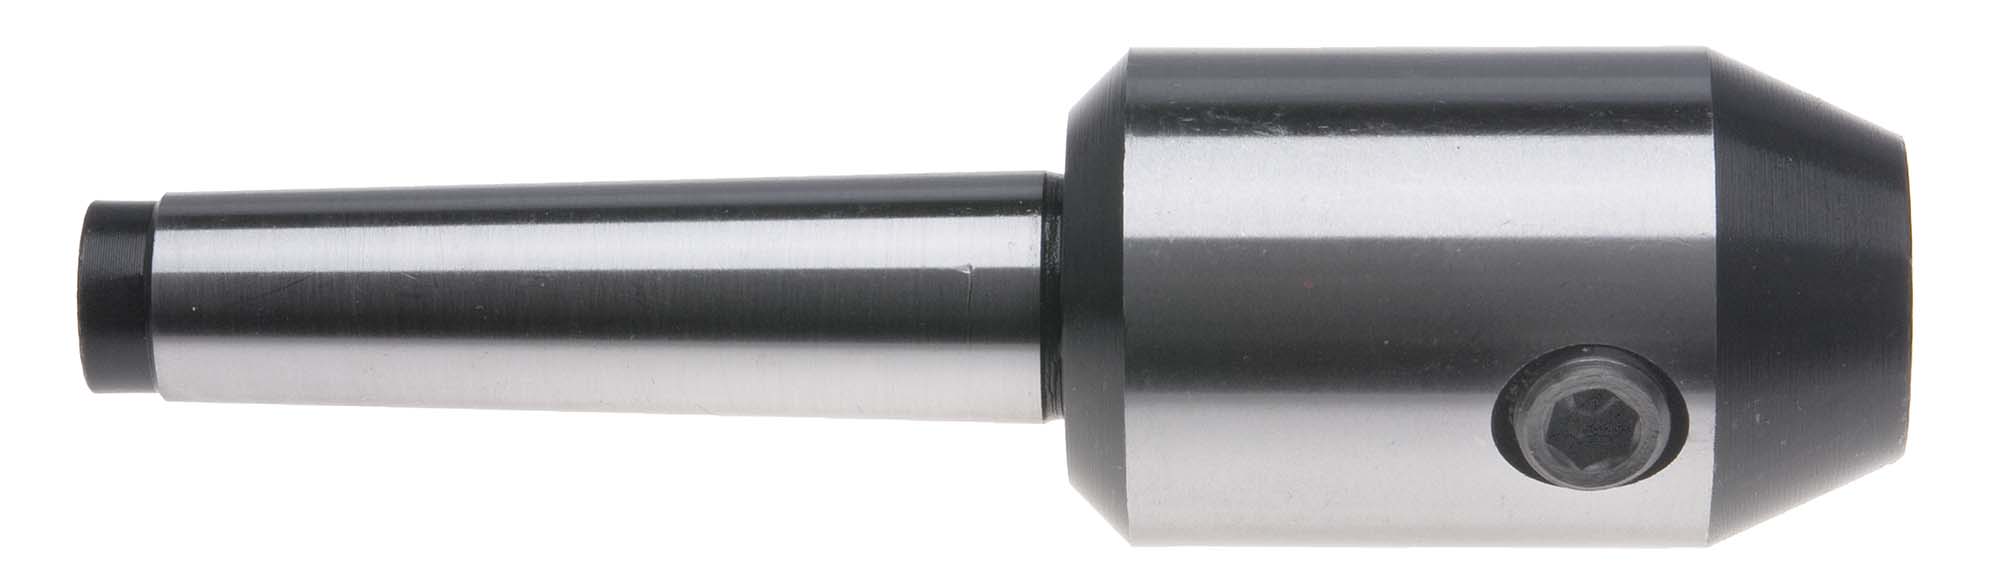 3 MT-3/4 End Mill Adapter with Drawbar End (for single end mills)